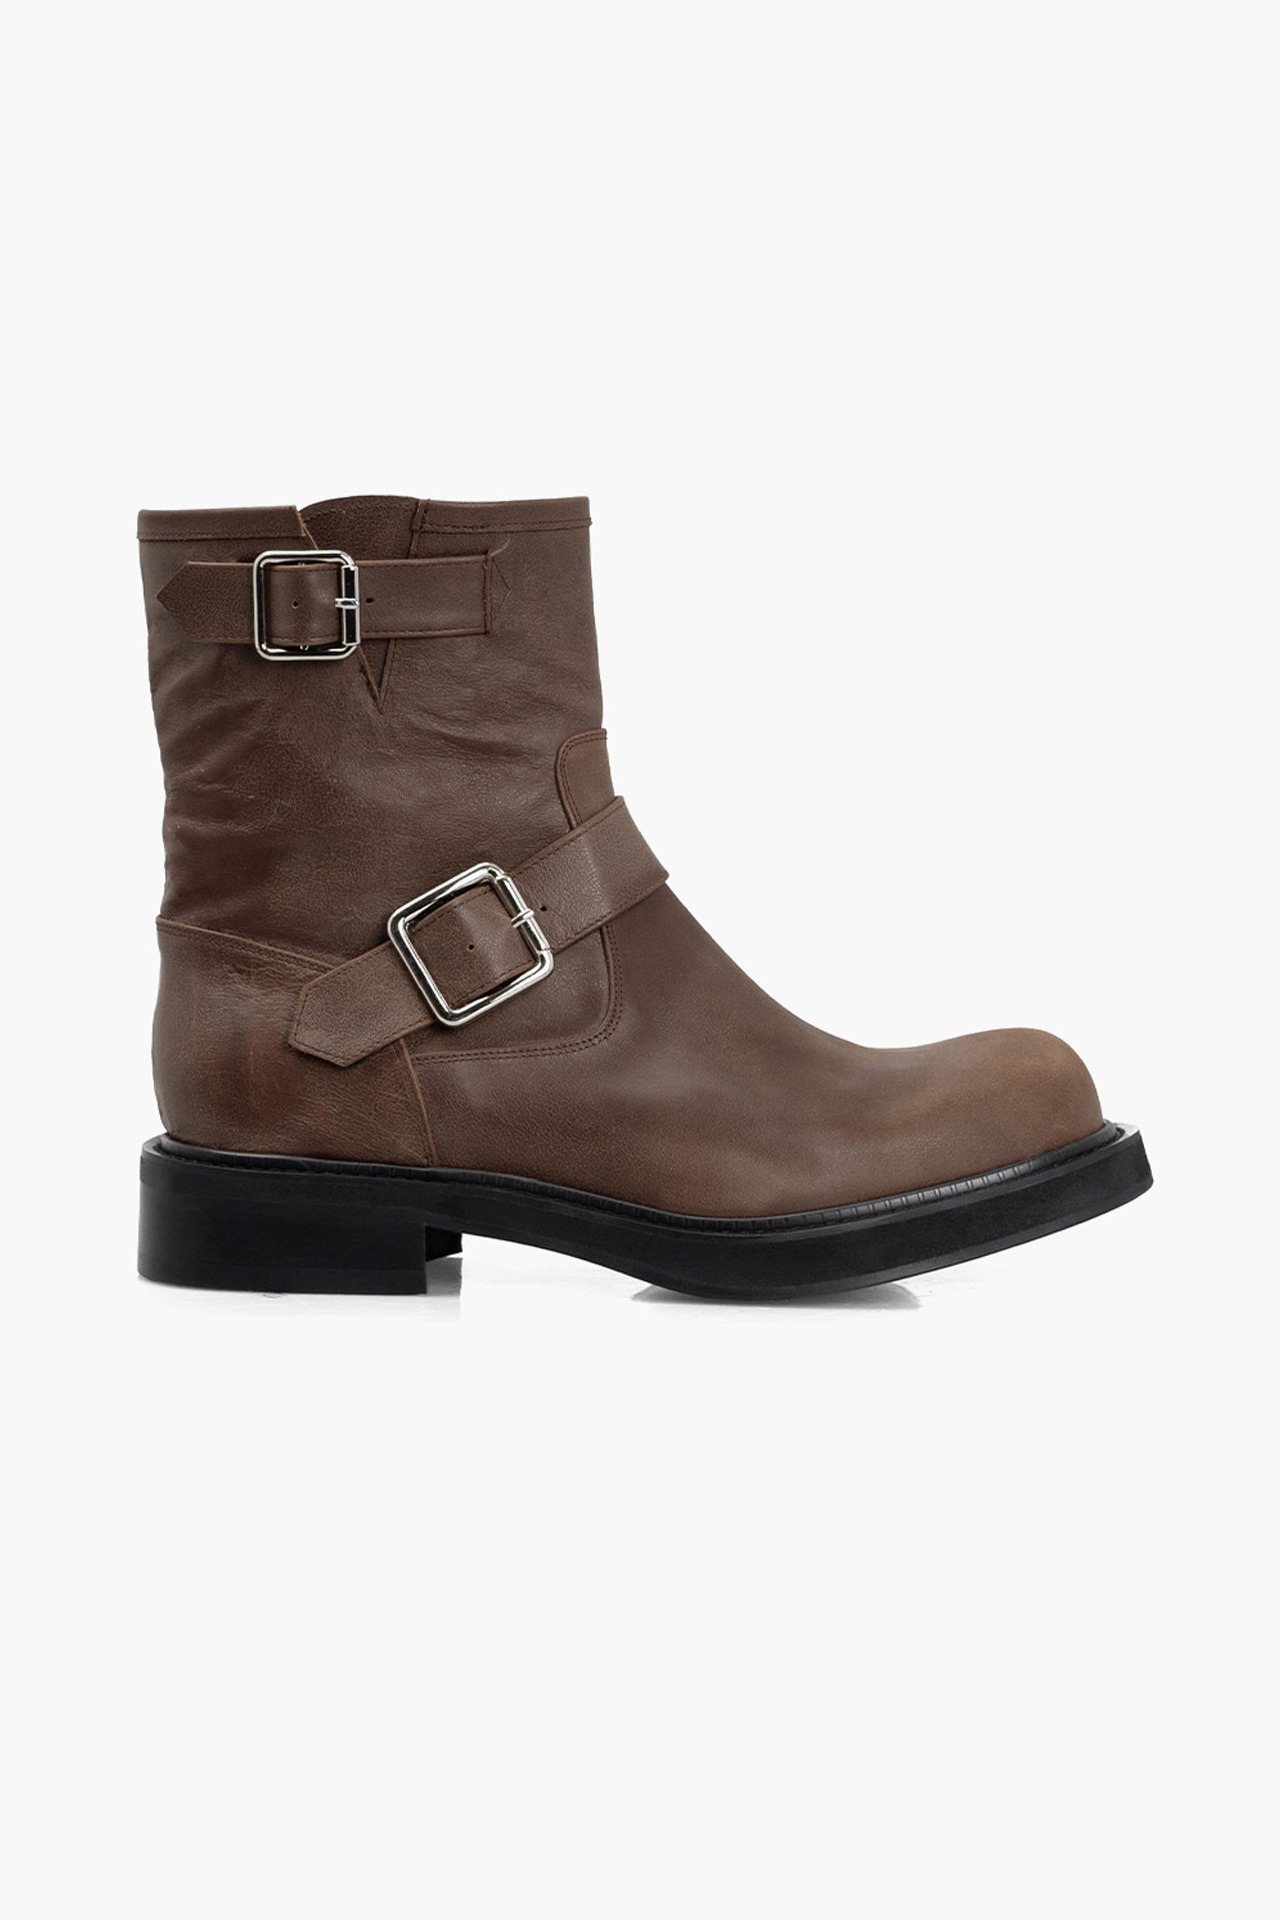 613 Marvin Engineer Boots Brown